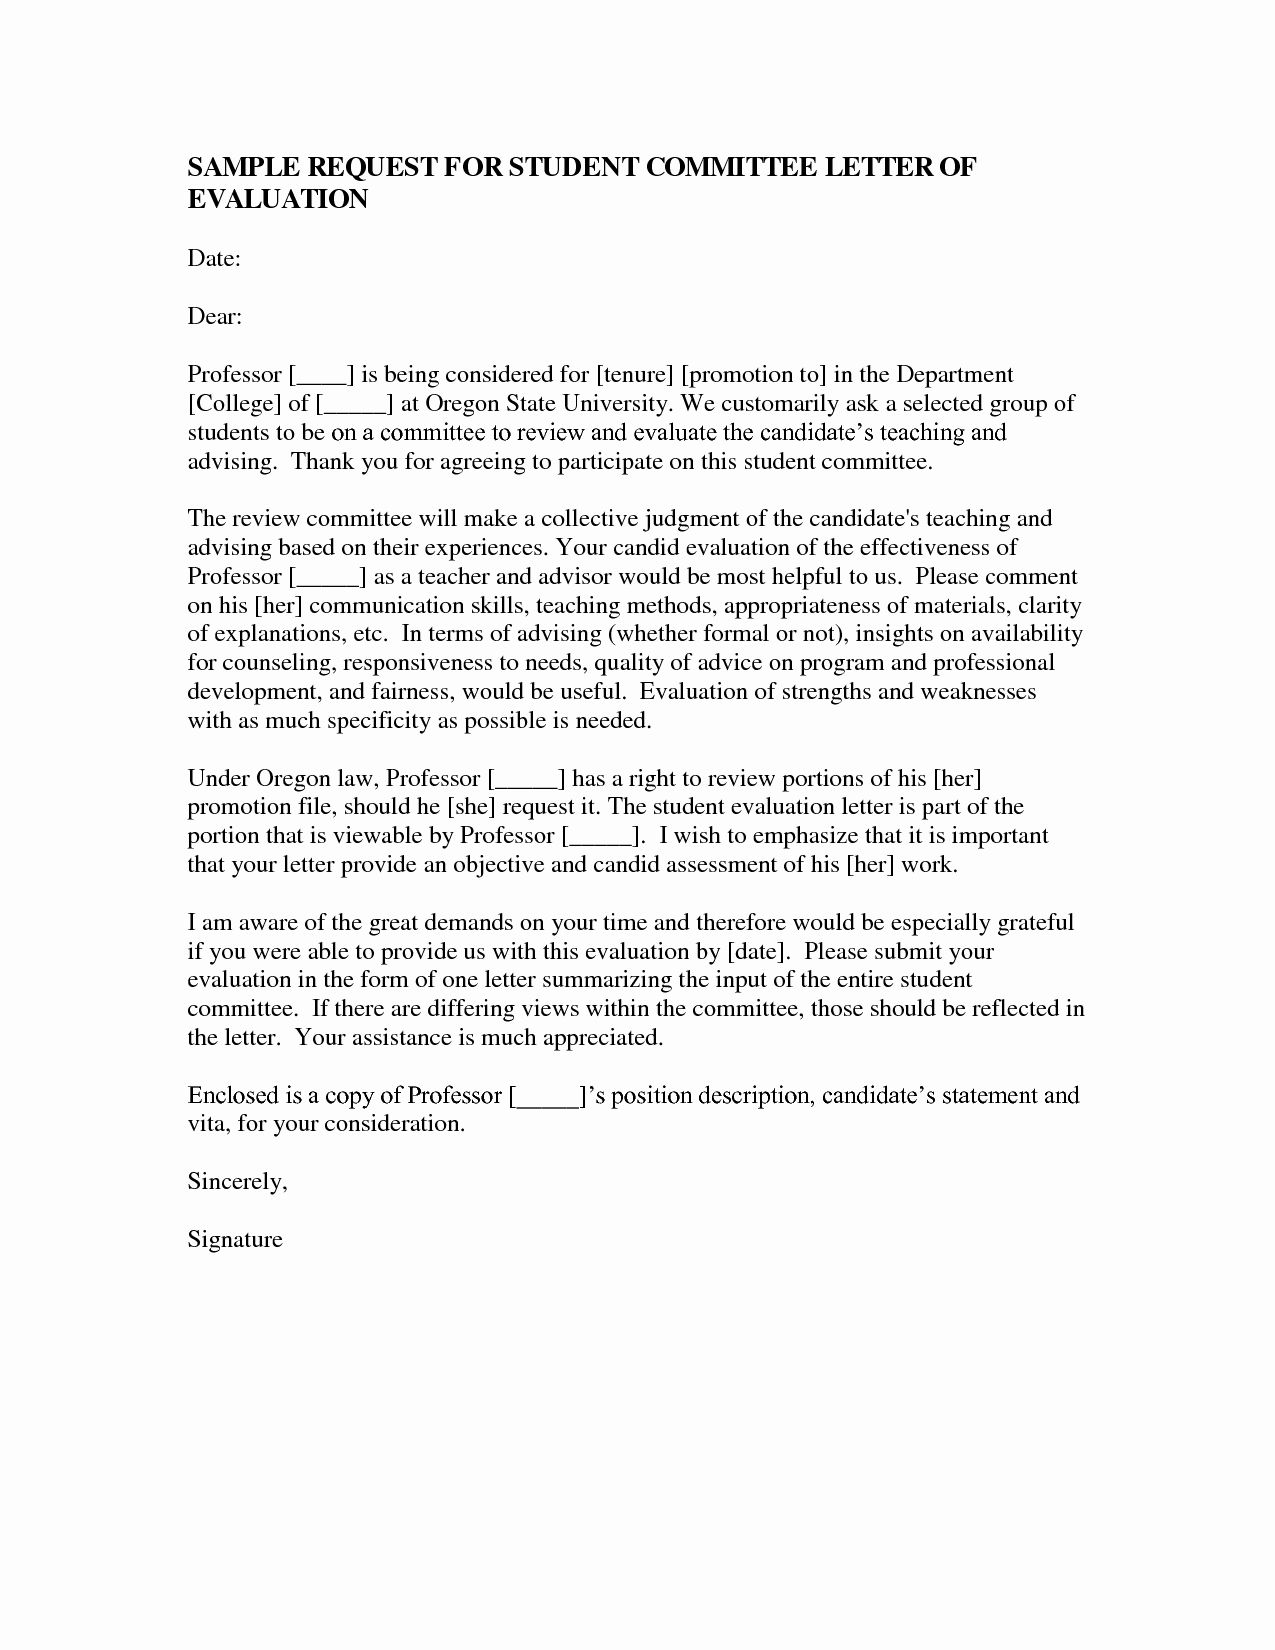 30 Recommendation Letter For Professor Promotion In 2020 inside size 1275 X 1650